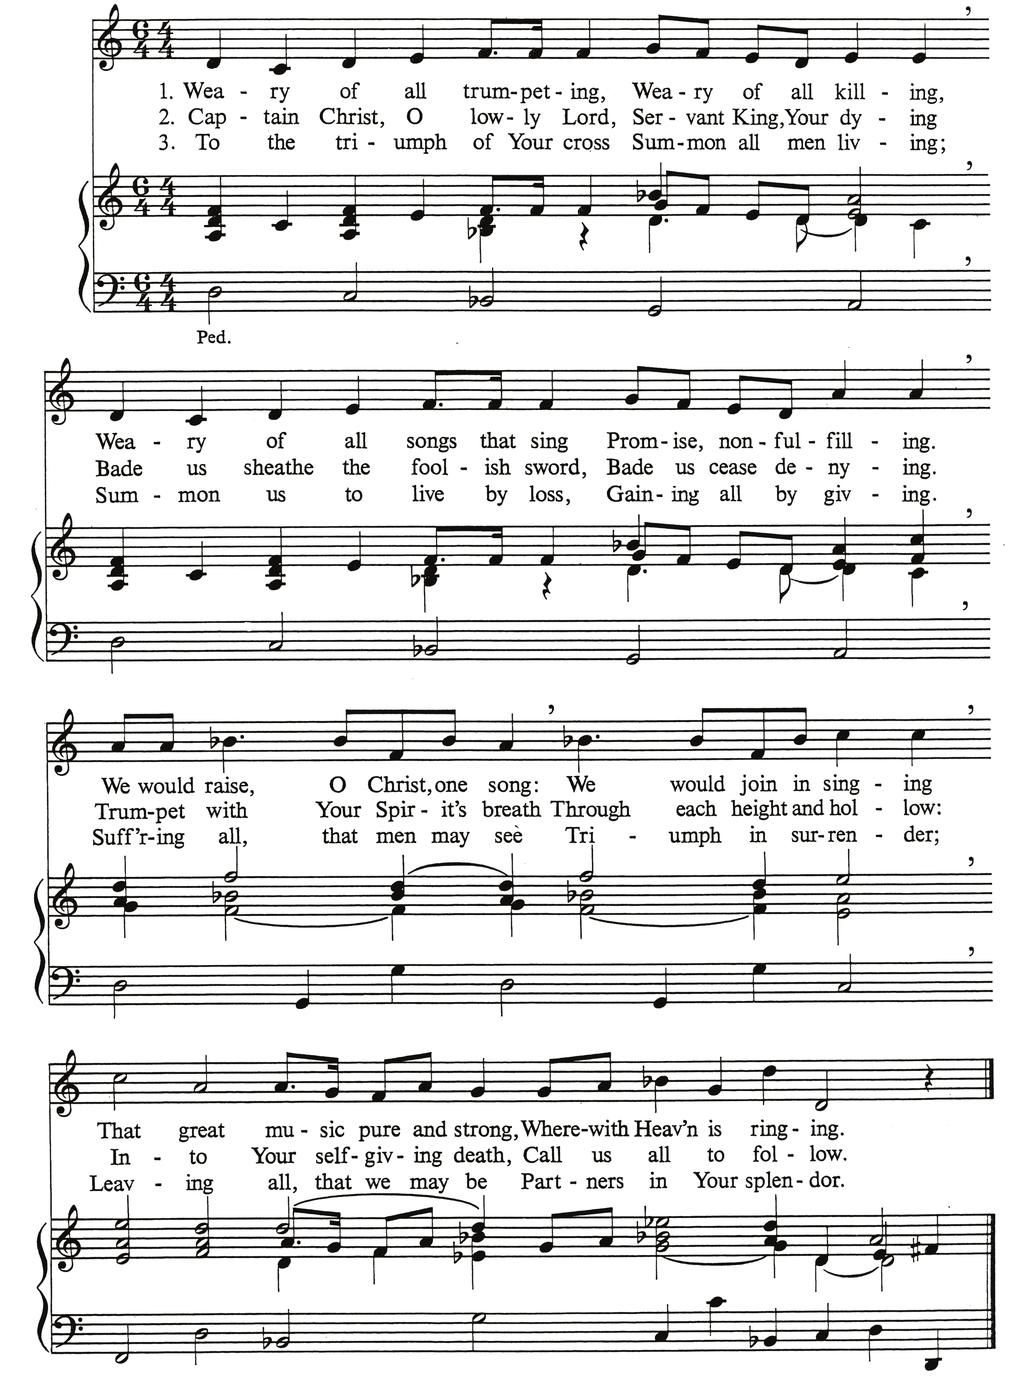 The Hymn, Weary of All Trumpeting Text: Martin Franzmann, 1971 Melody: Hugo